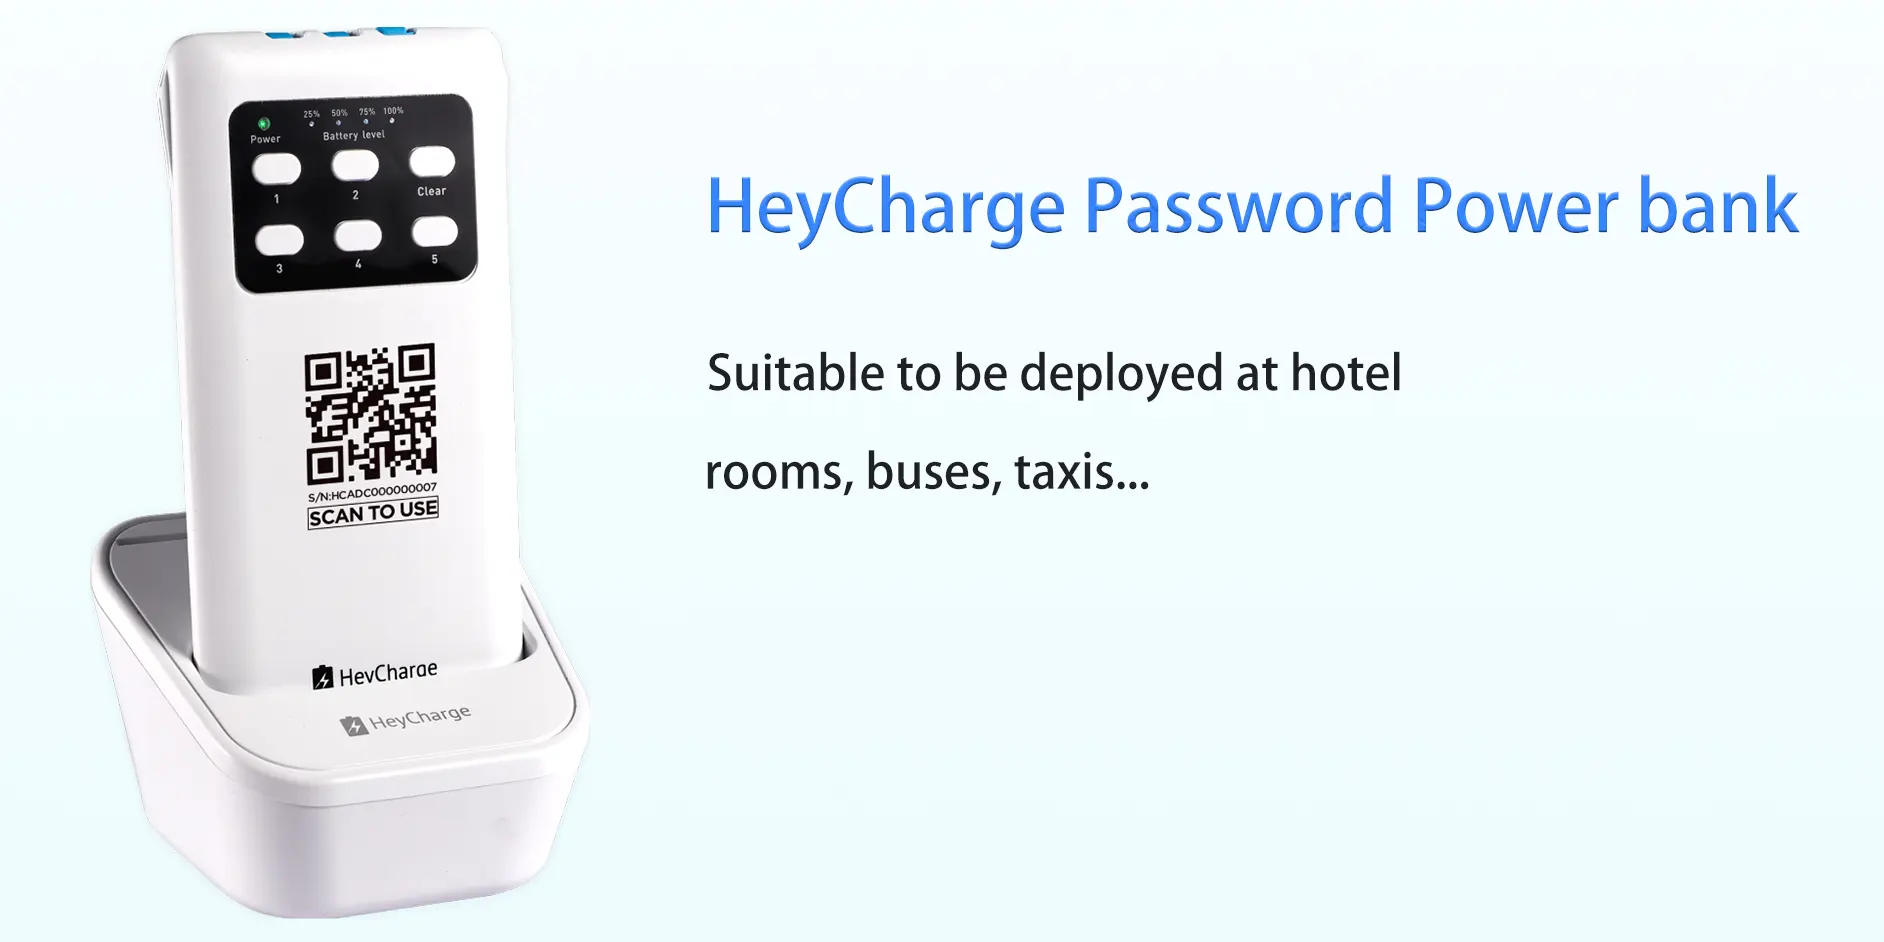 HeyCharge password power bank suitable for hotel rooms